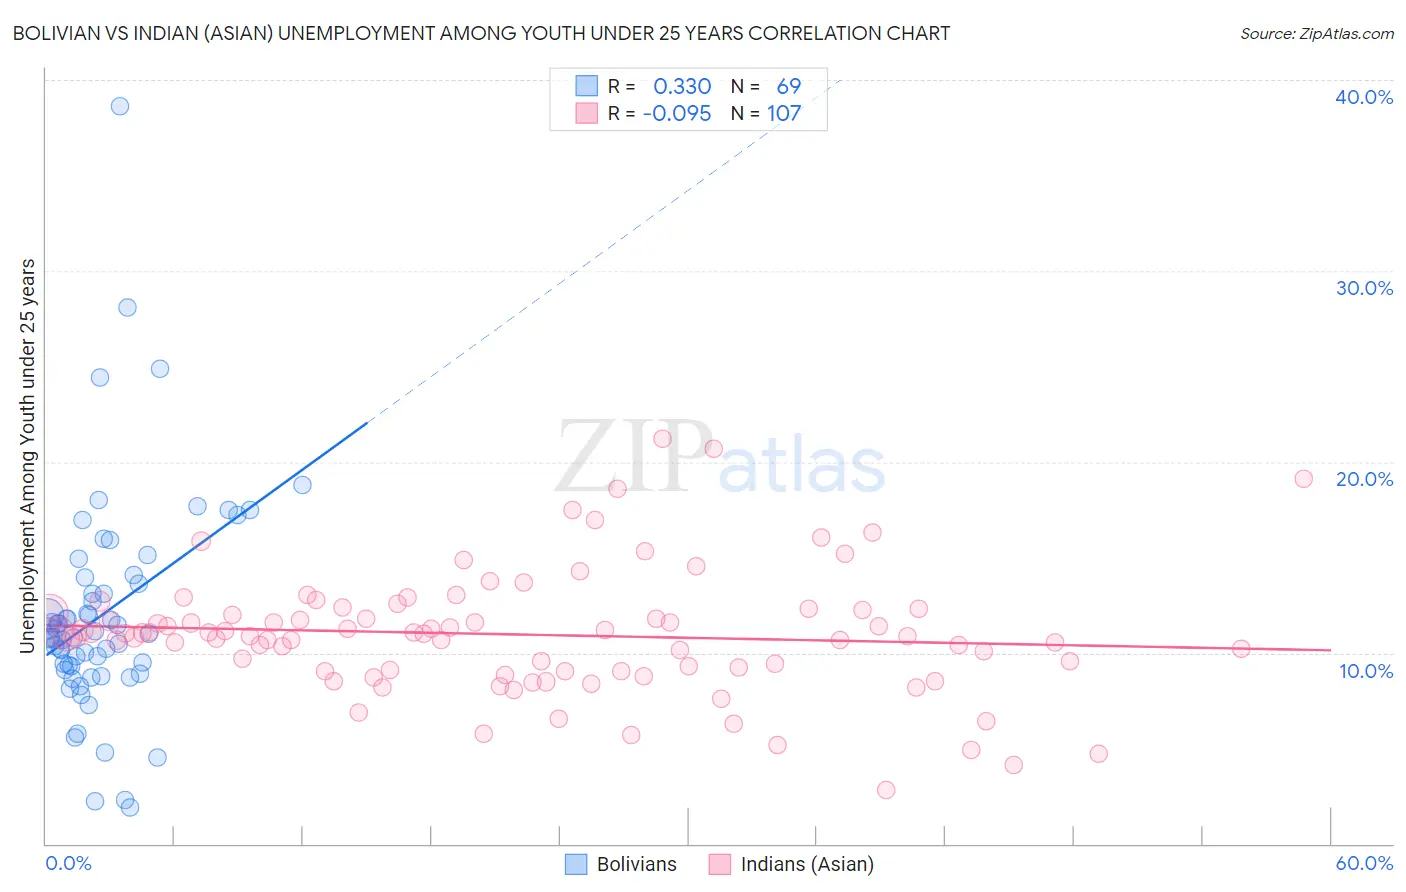 Bolivian vs Indian (Asian) Unemployment Among Youth under 25 years